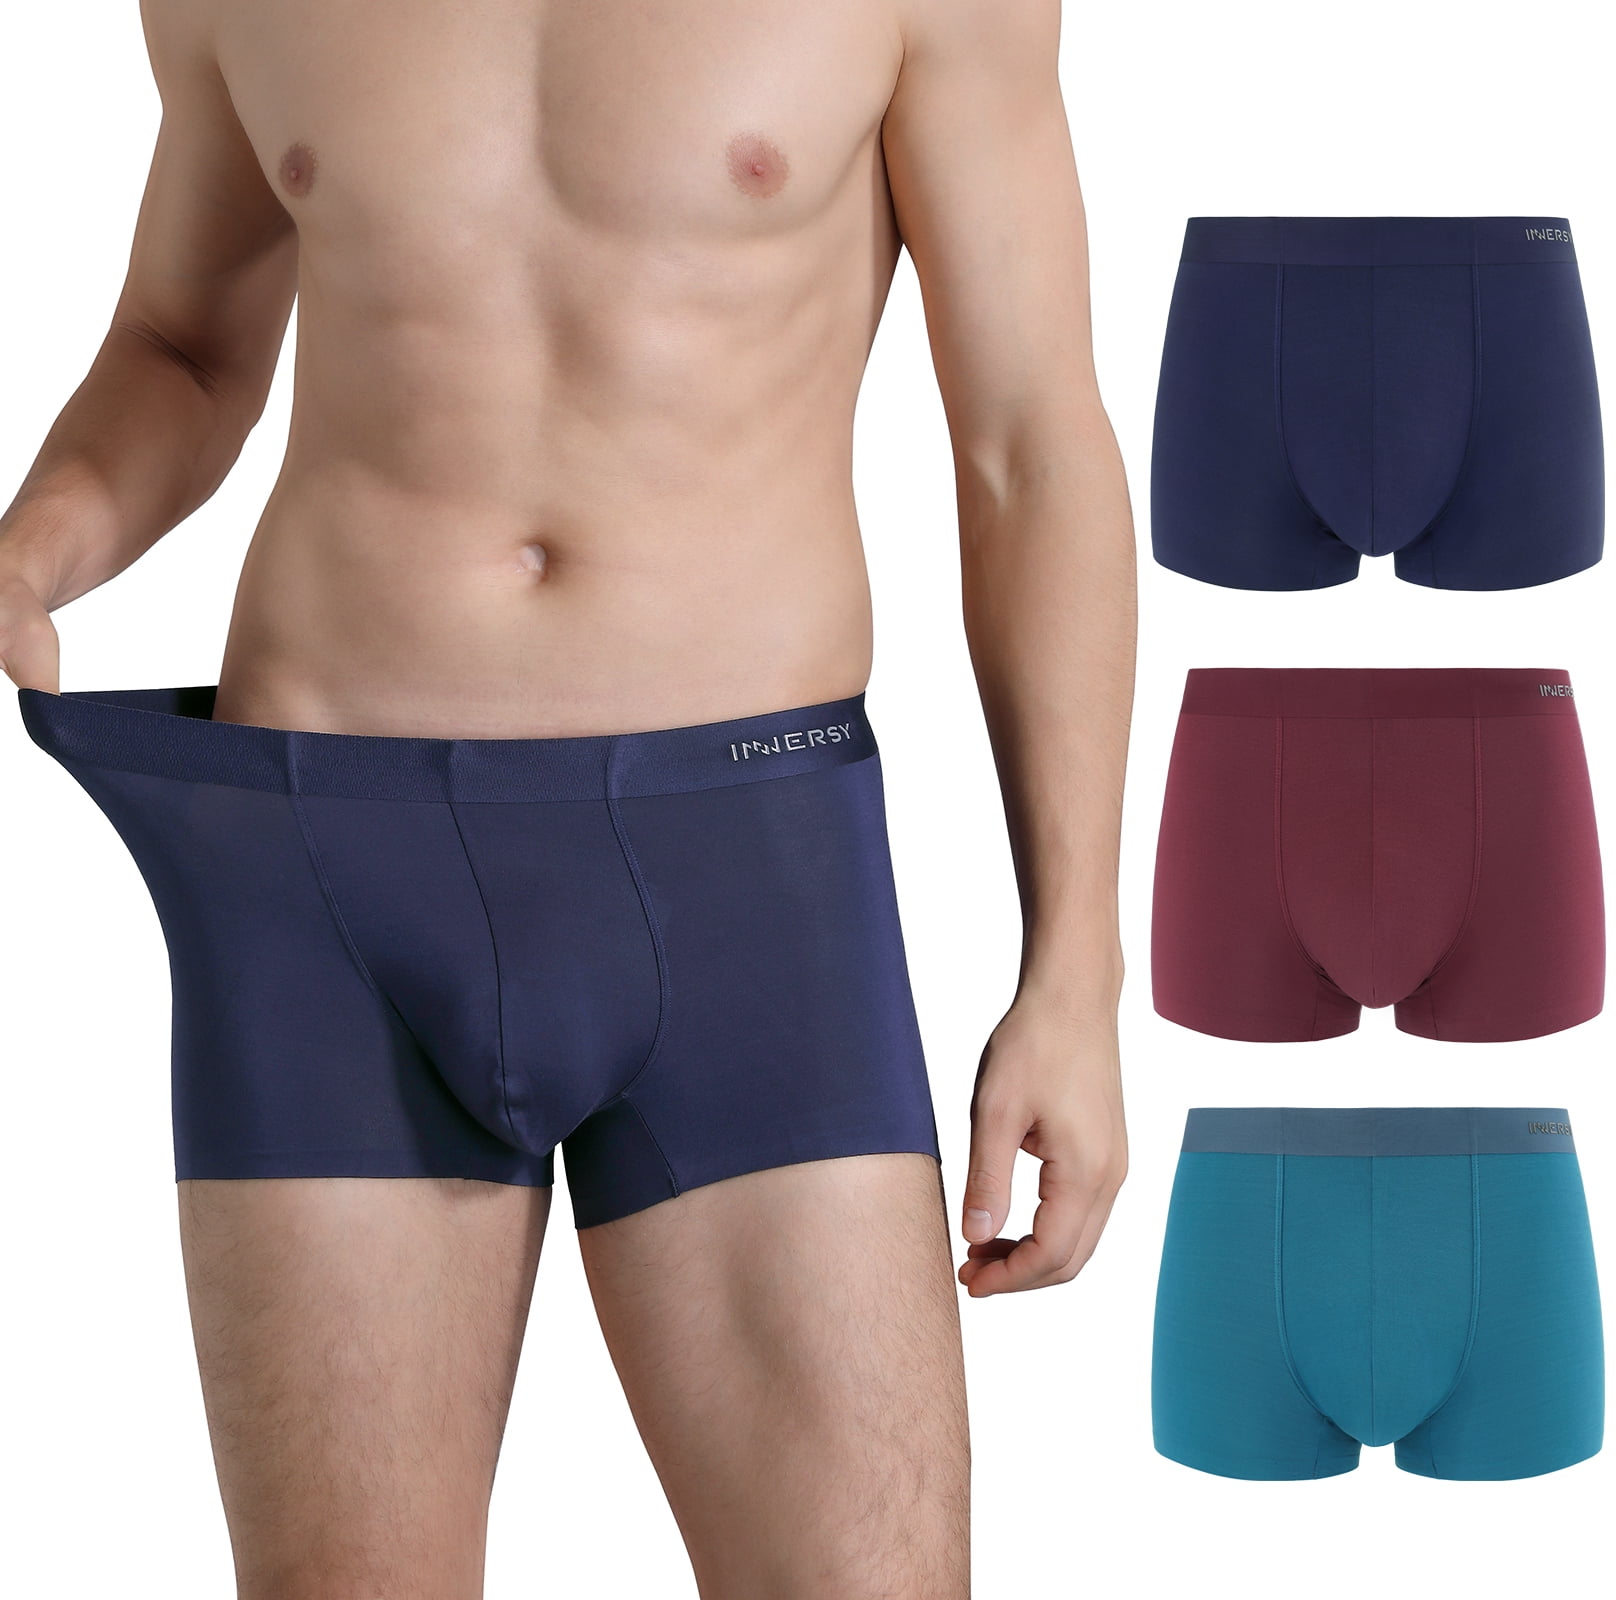 INNERSY Mens Underwear Trunks Open Fly Stretch Cotton Boxer Shorts Low Rise Pants Pack of 4 